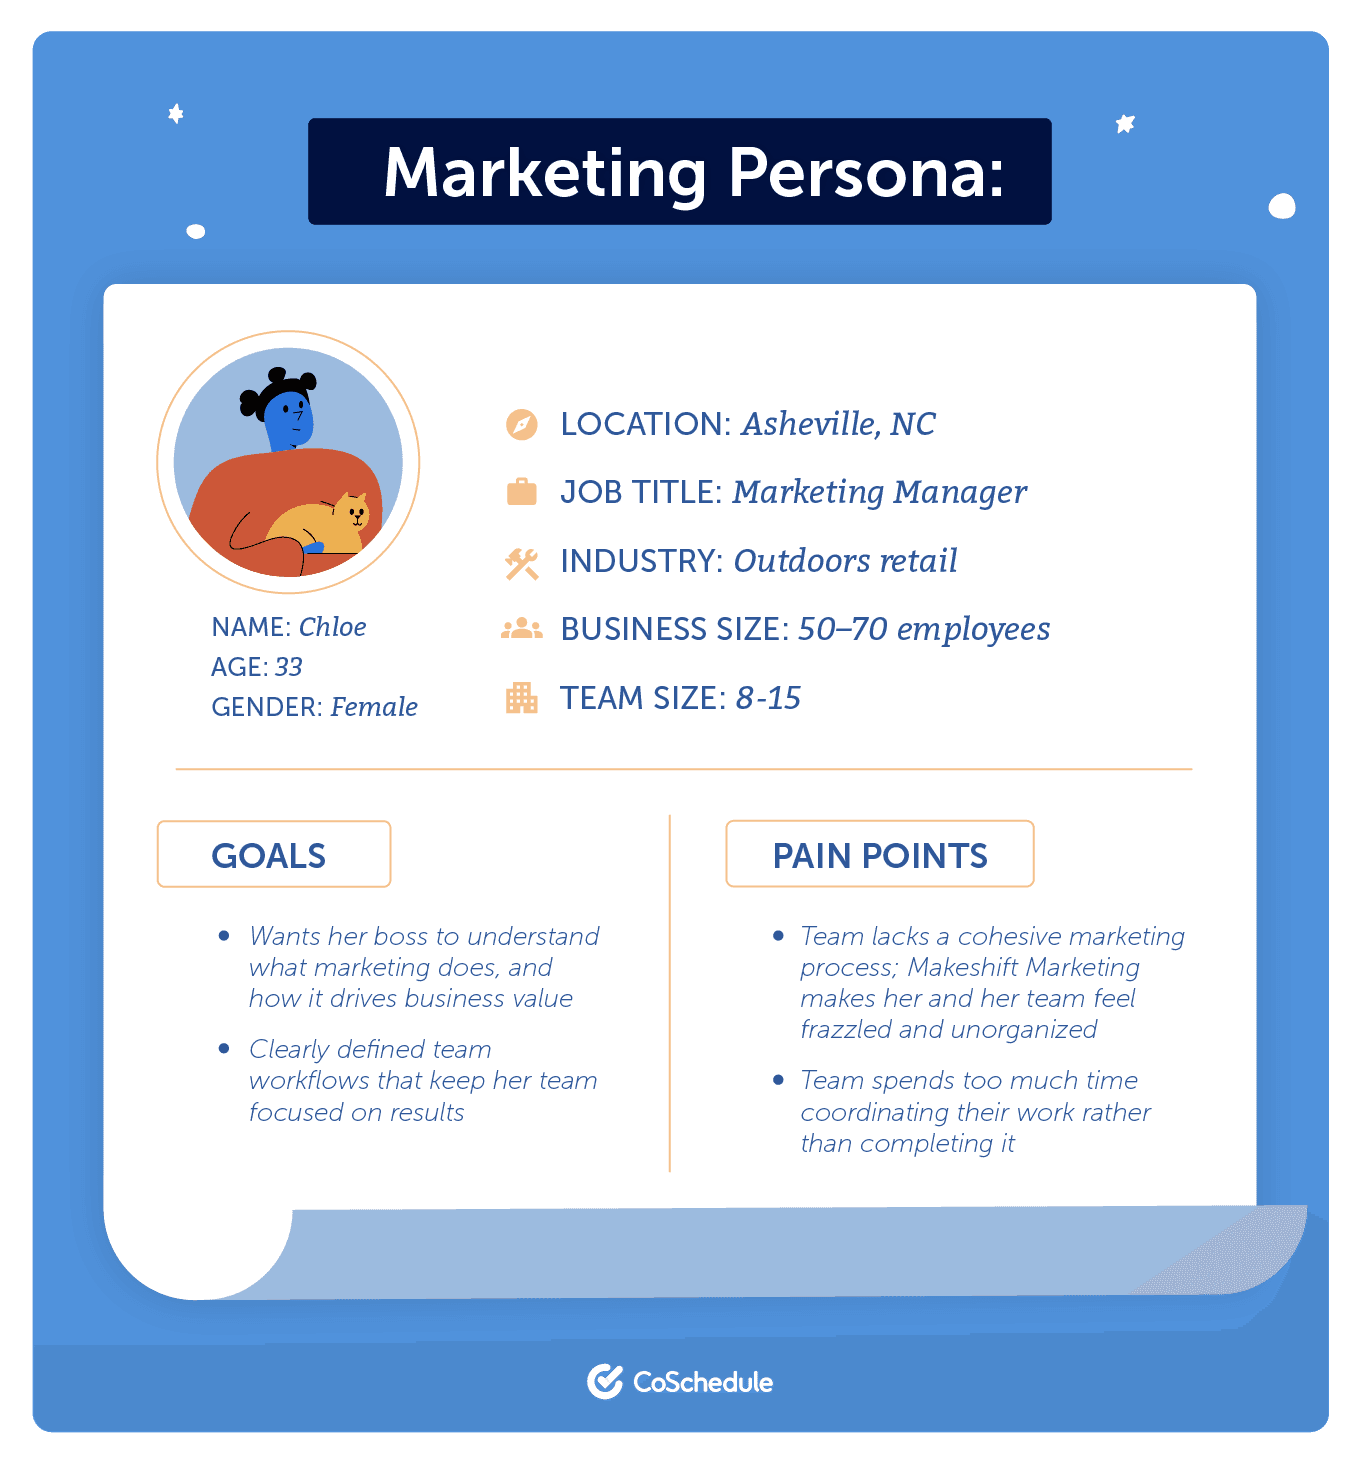 Marketing persona cards can show details, goals, and pain points of the marketer